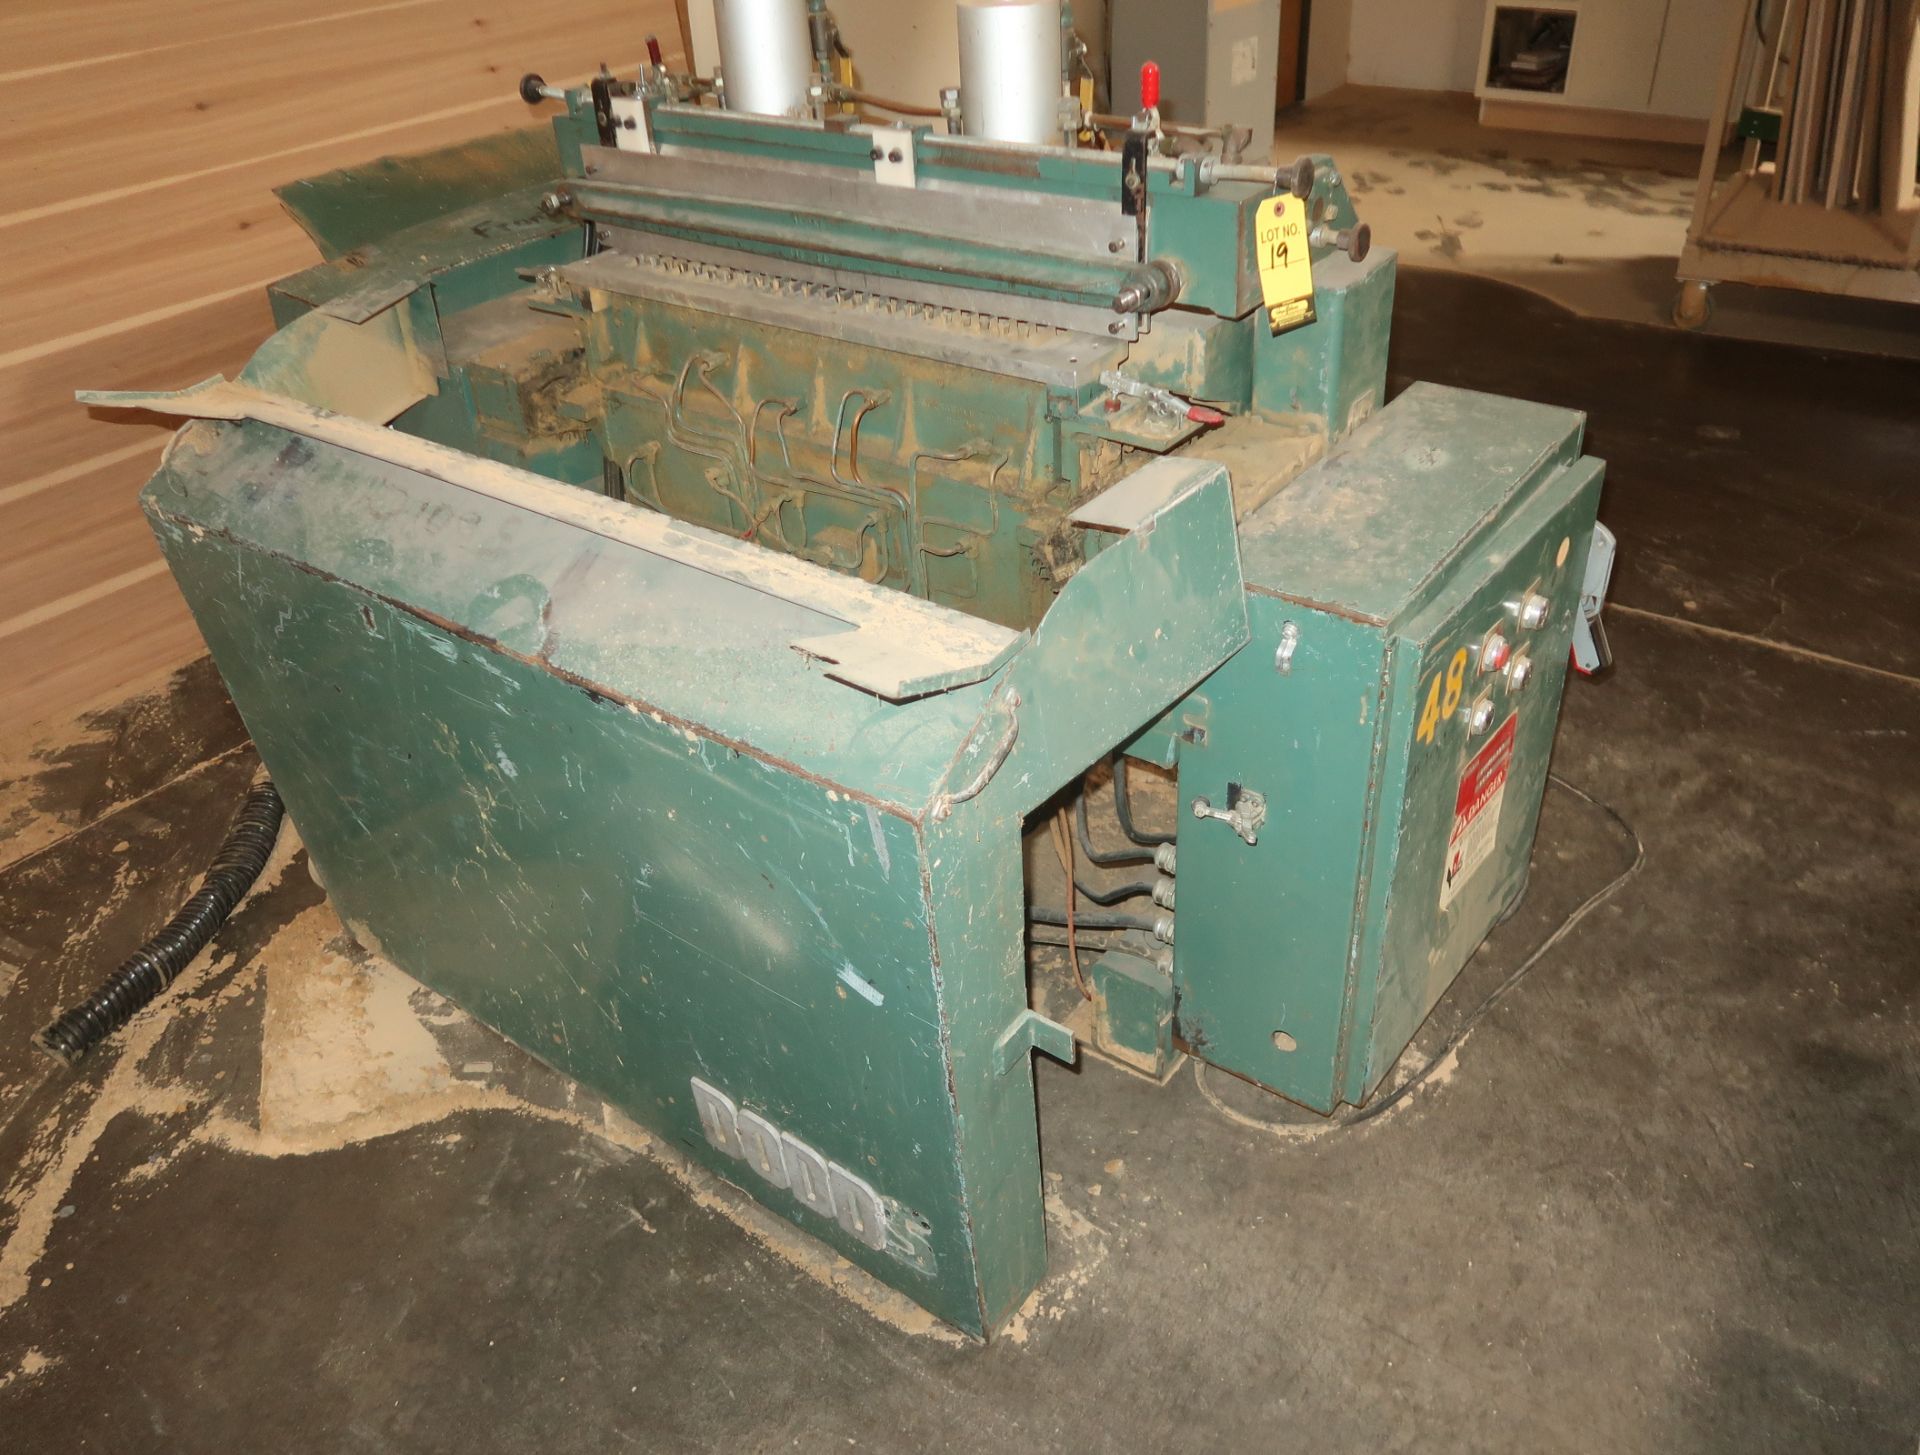 DODDS MDL. SE-25 DOVETAIL MACHINE, SN. D8875-190, CONDITION UNKNOWN, PANELS PRESENT, BUT REMOVED.